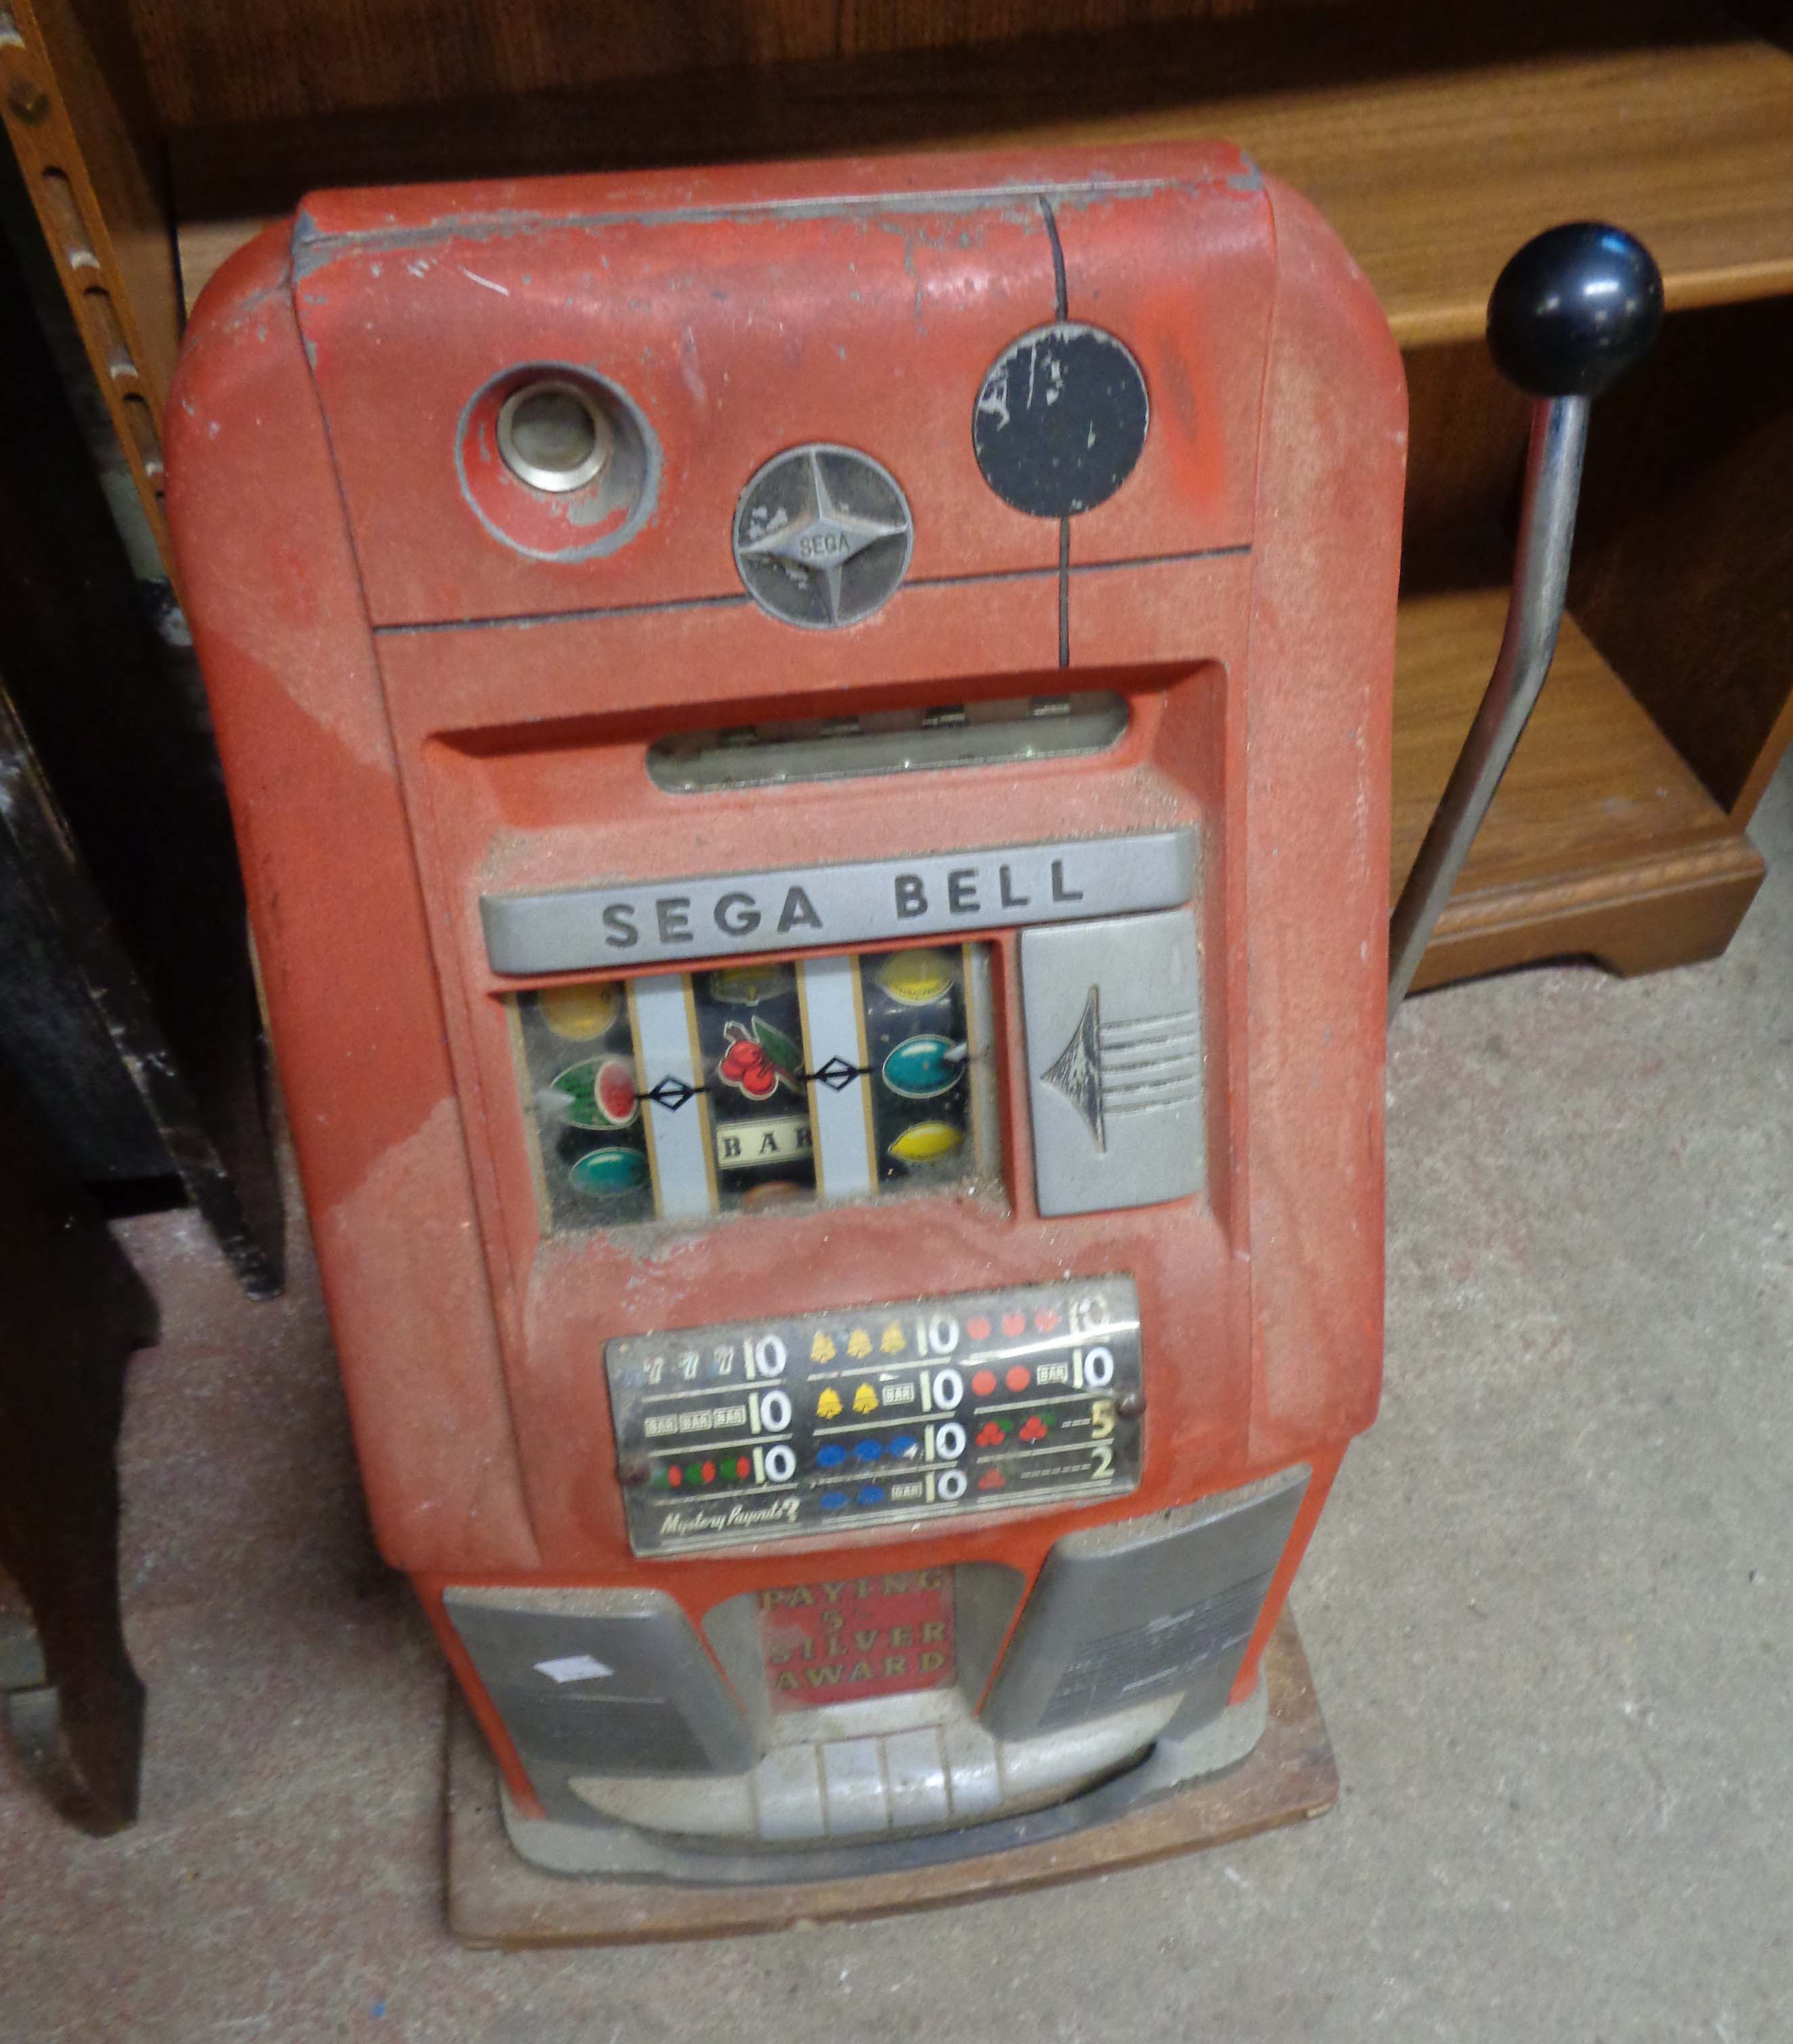 A vintage Sega Bell 'One Armed Bandit' fruit machine with red and chrome finish